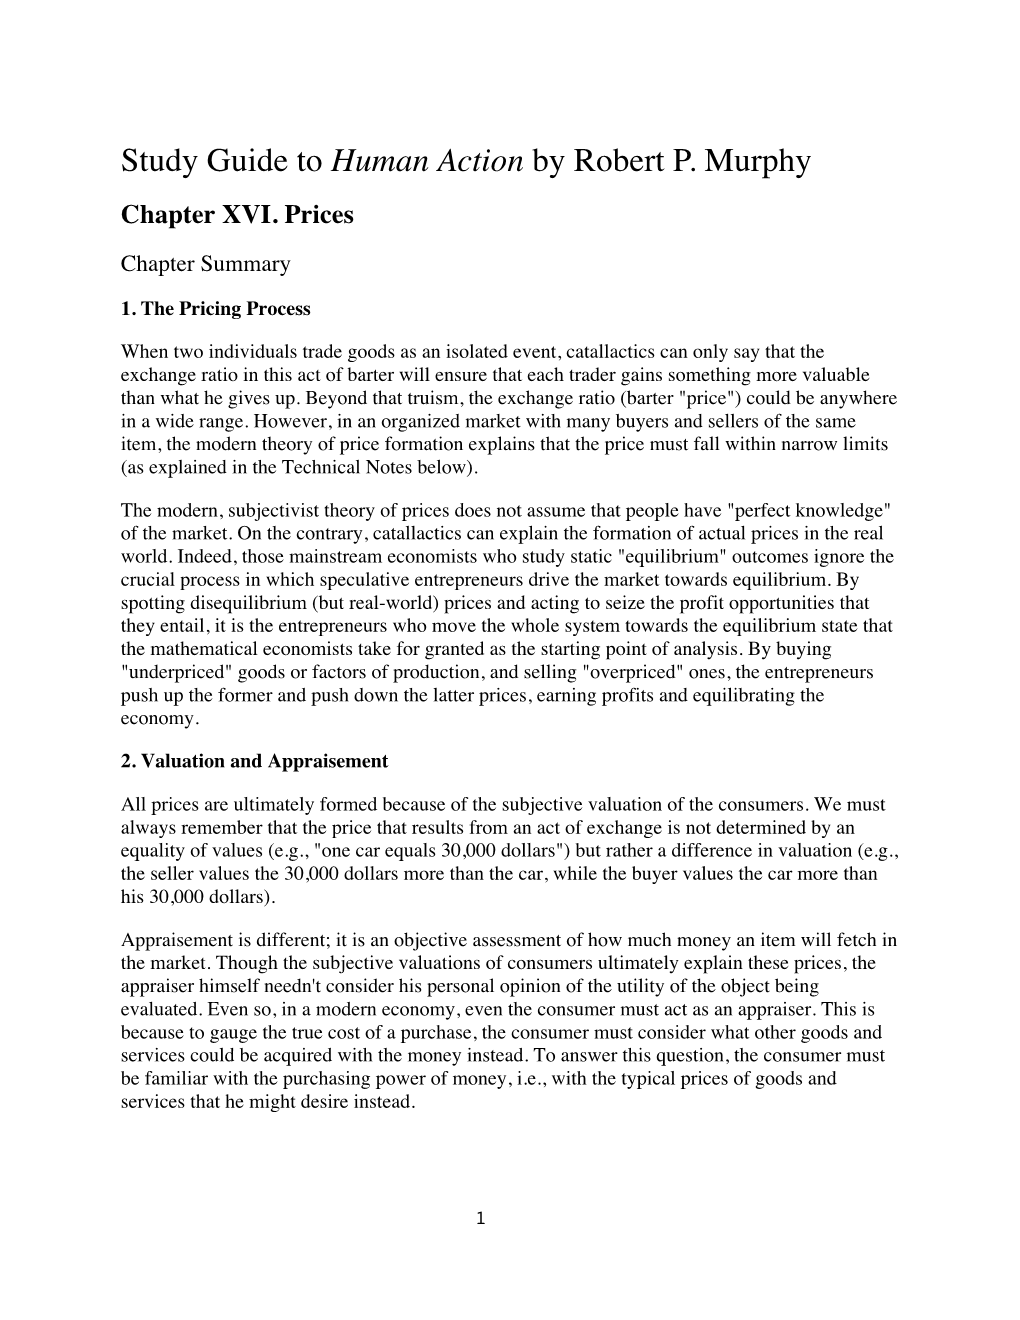 Study Guide to Human Action, Chapter